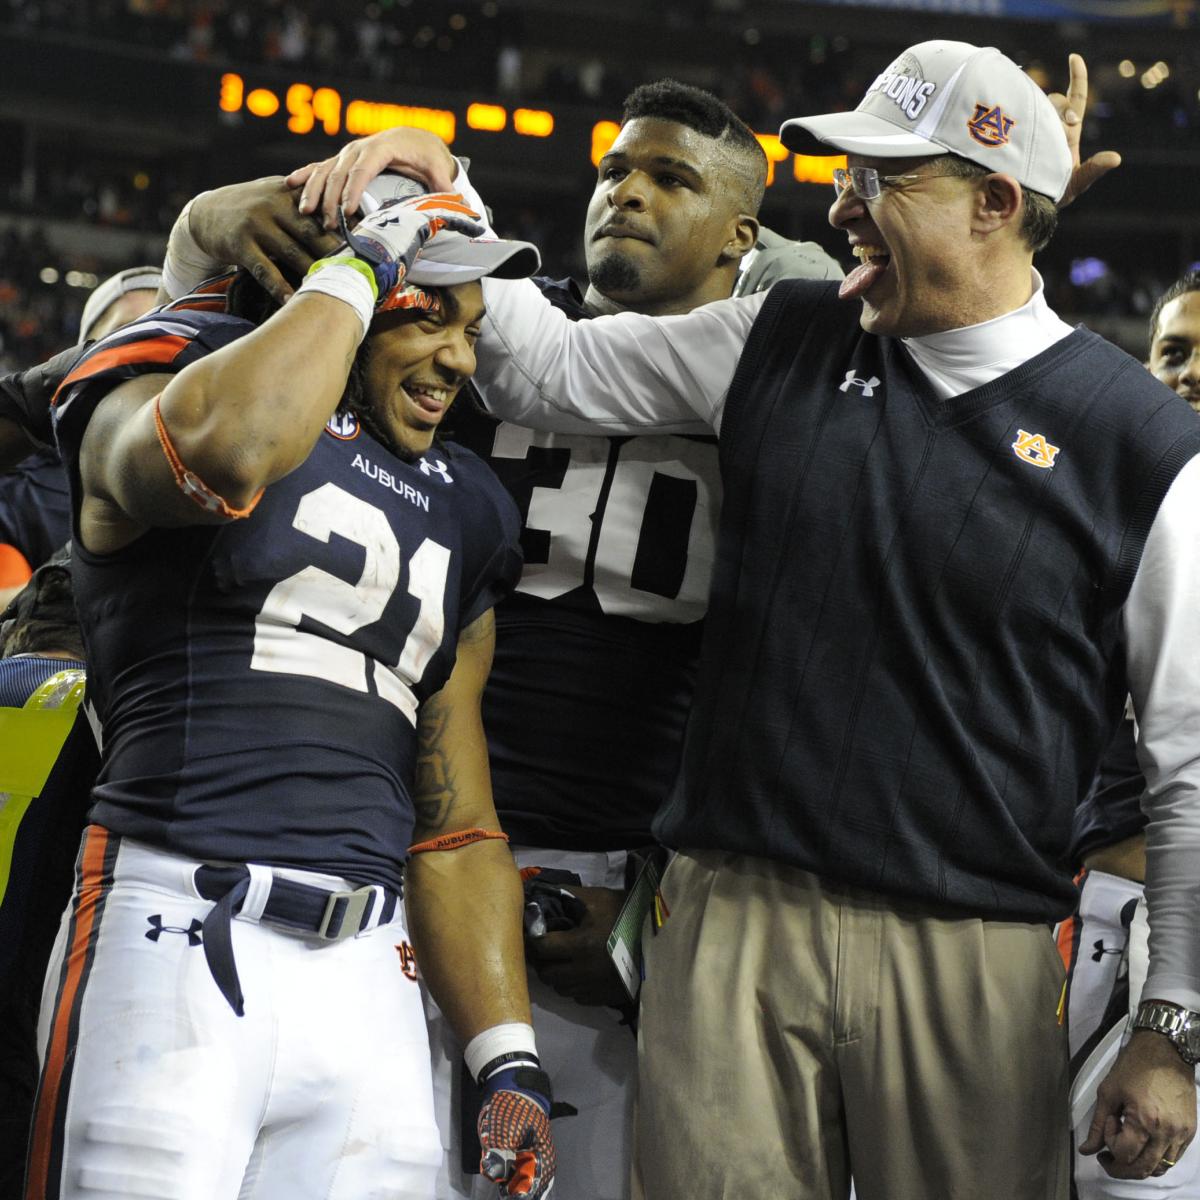 BCS Bowl Schedule 2013-14: When and Where to Catch Exciting Slate of